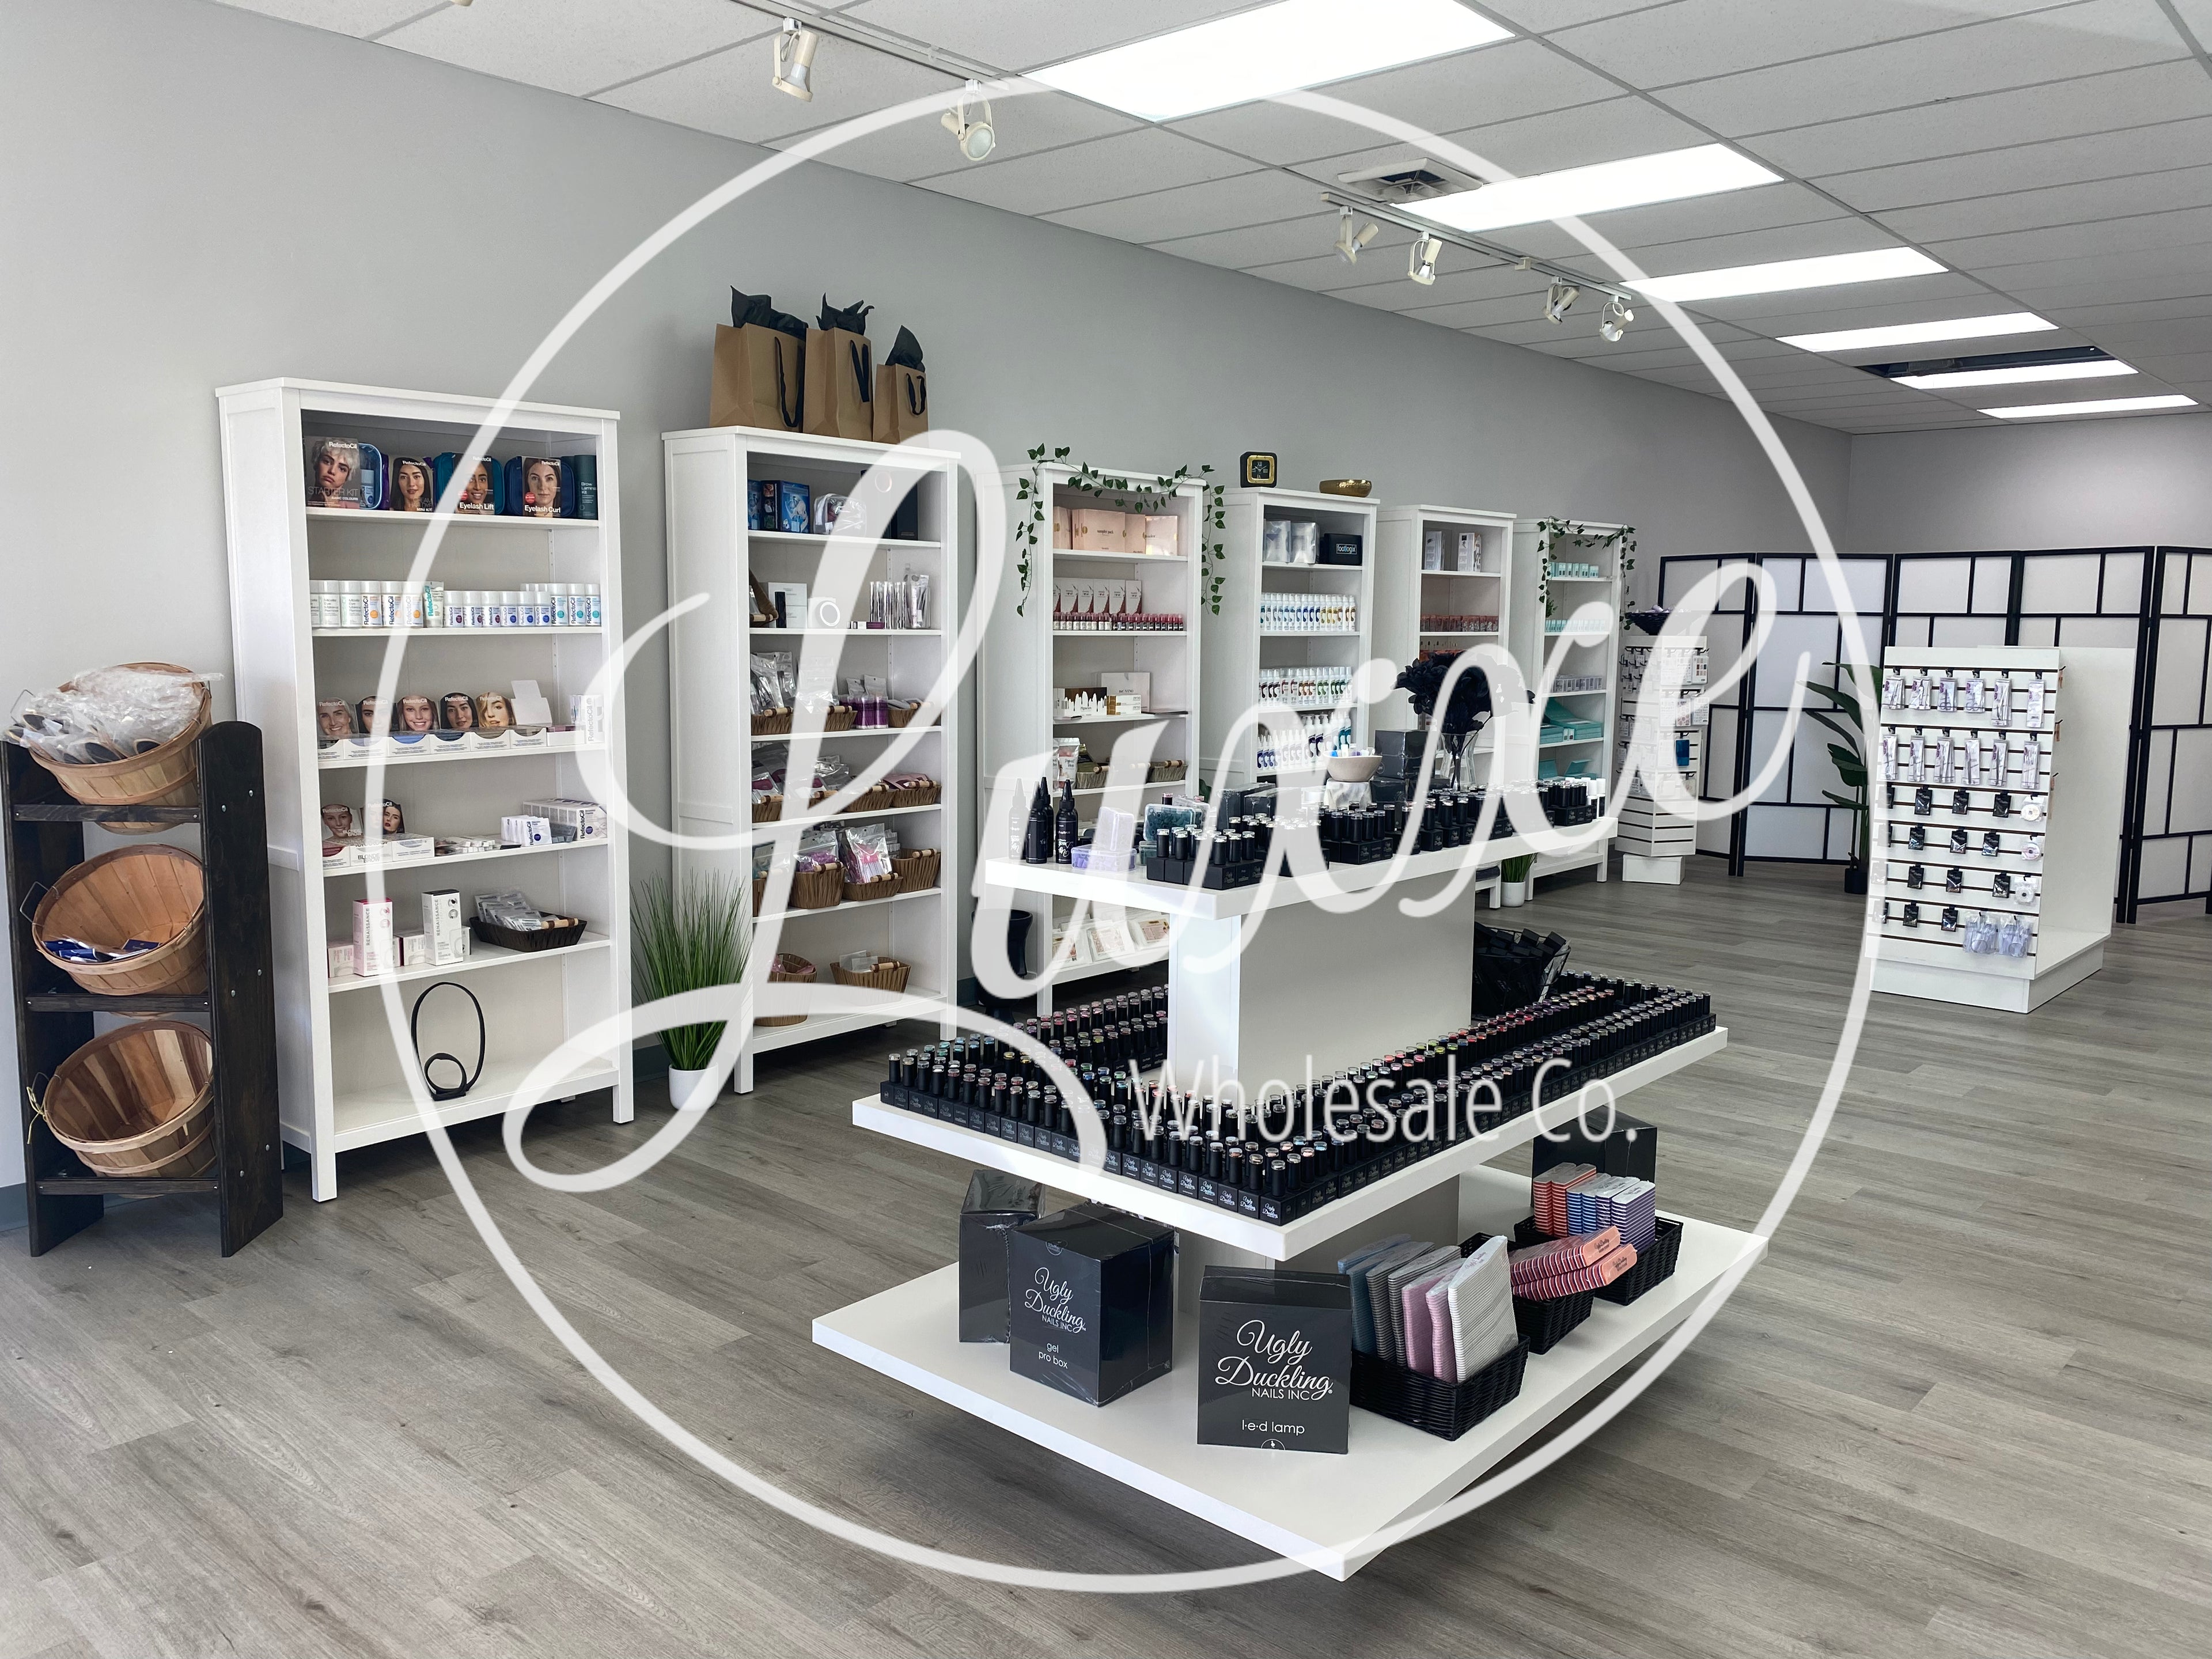 Luxxe Wholesale Co. Store with Shelves stocked with products for Nail Technicians, Estheticians, and Licensed Beauty Professionals.